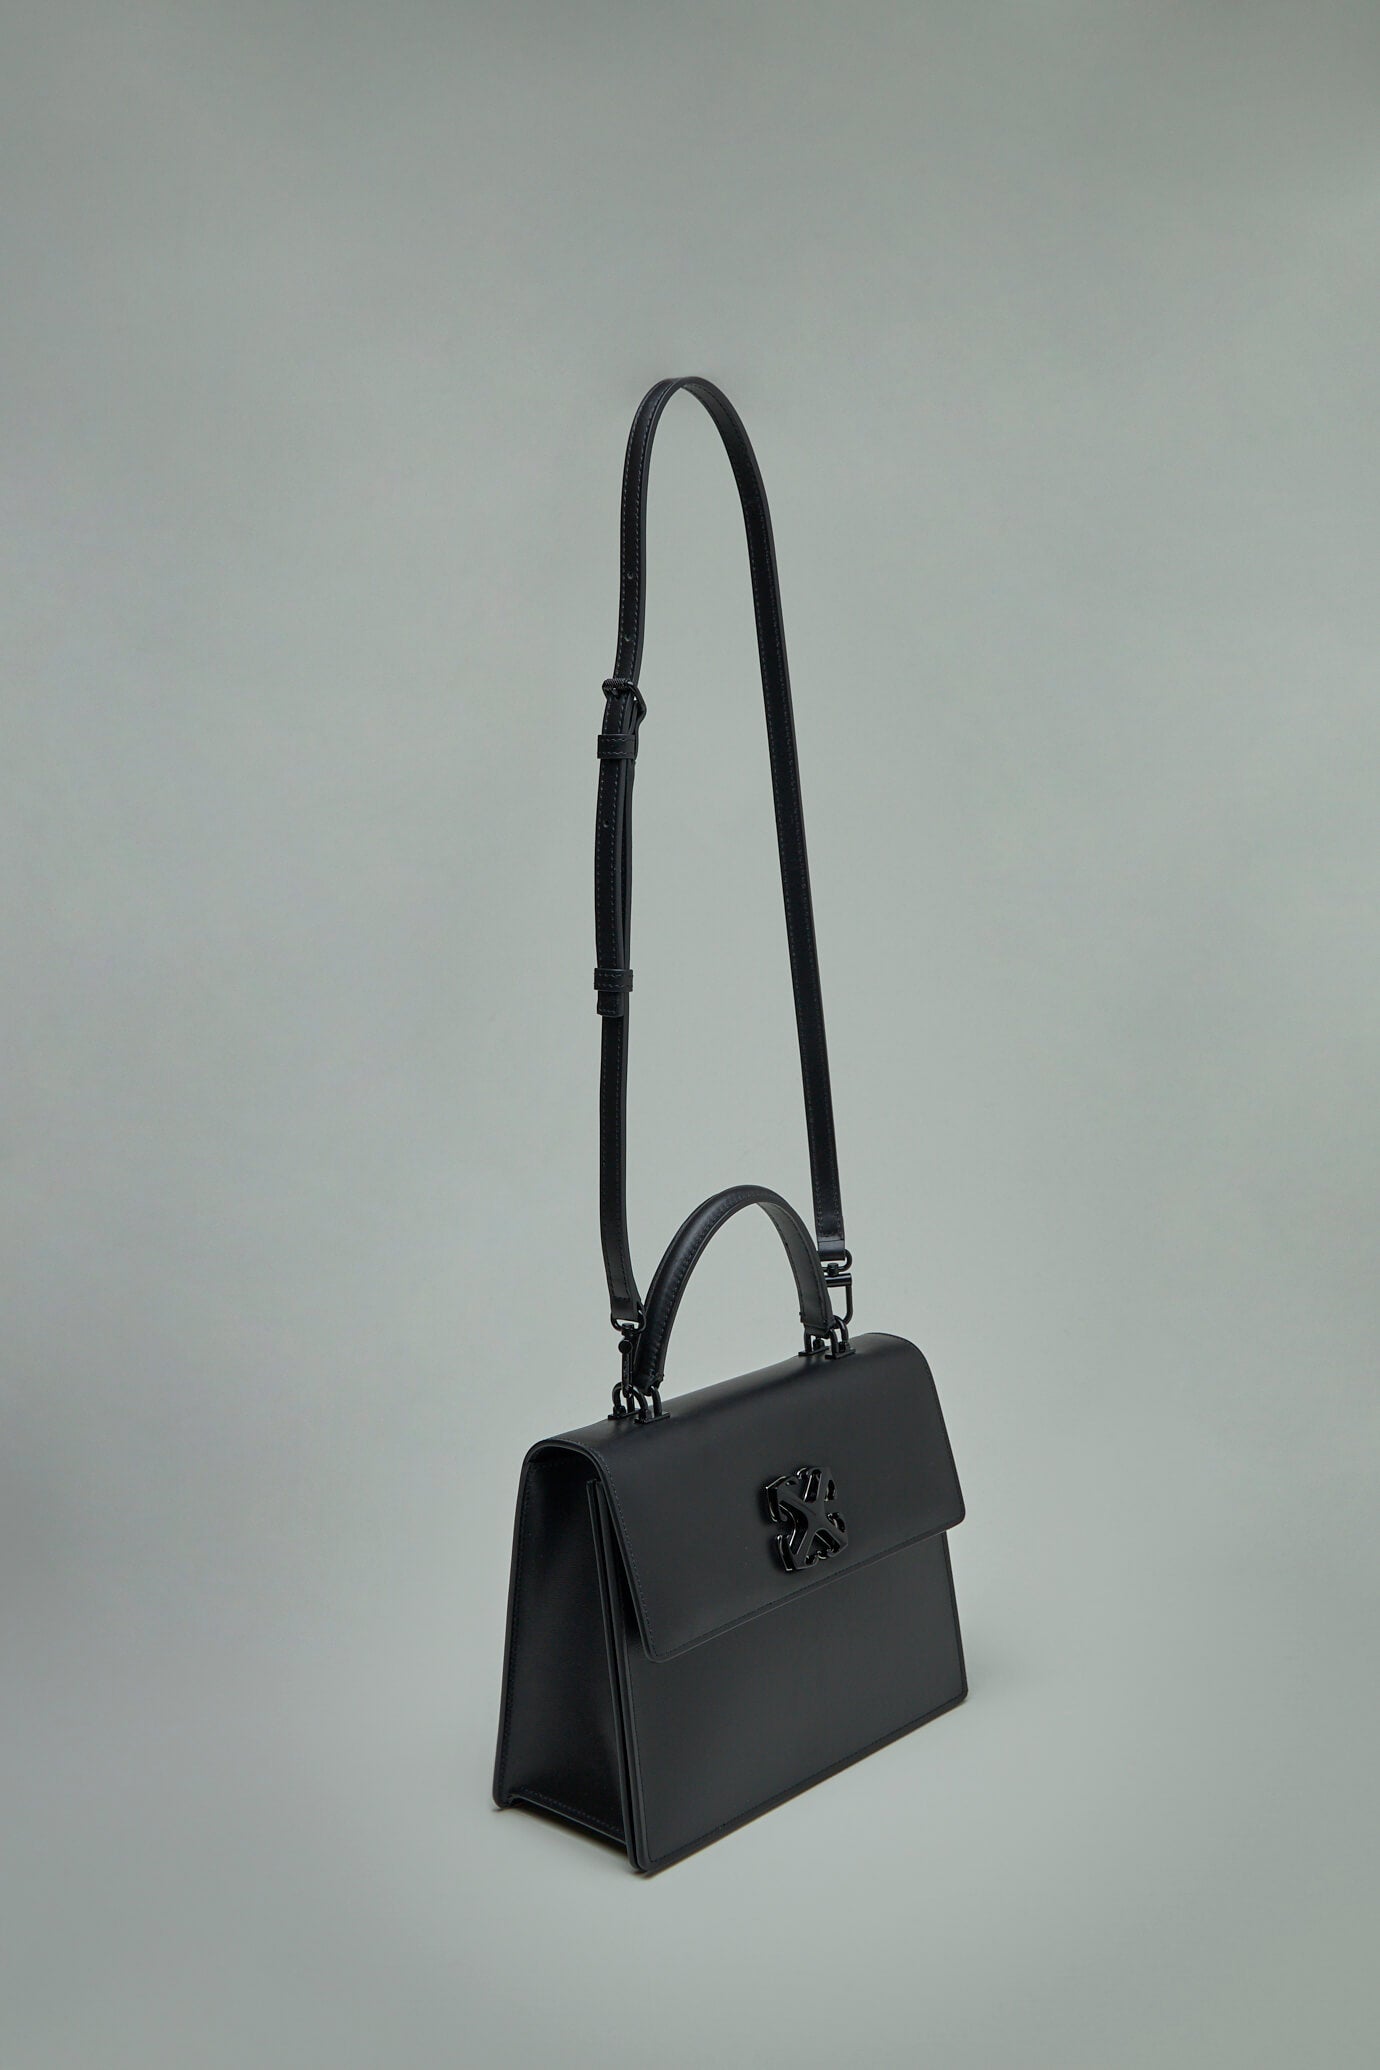 Off-White Jitney 1.4 Leather Top-Handle Bag